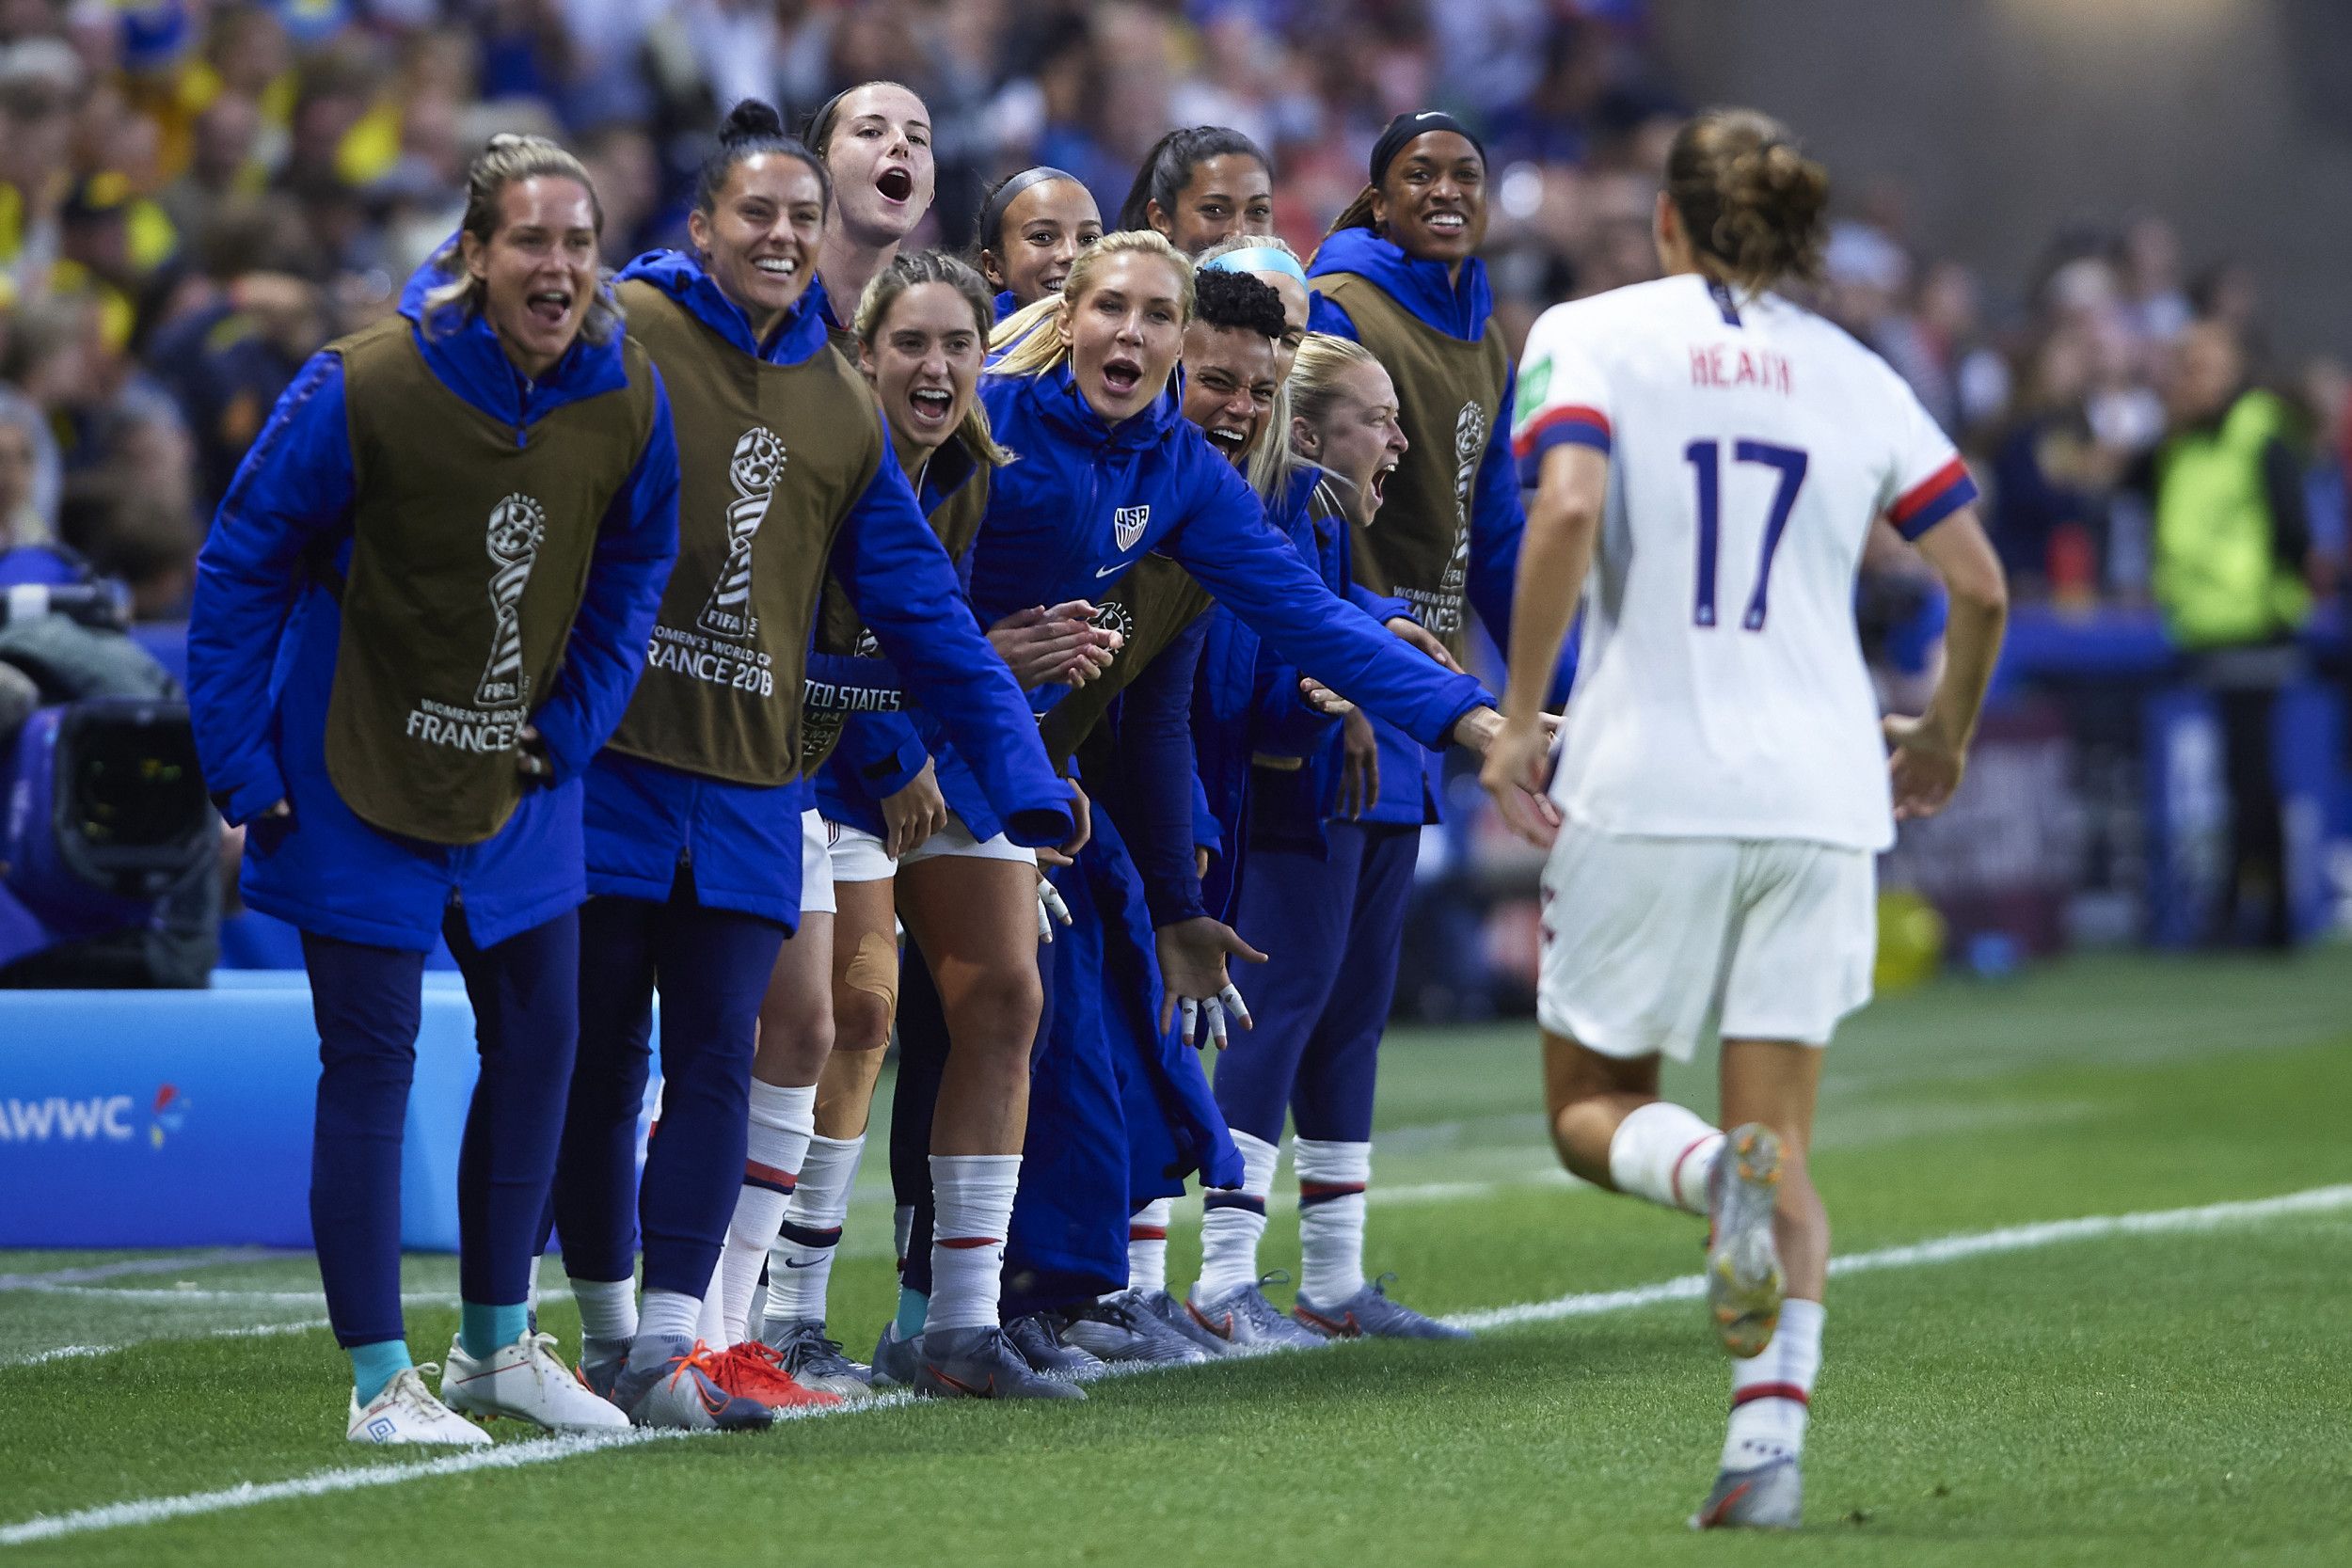 Women's World Cup 2019: Latest Odds, Expert Predictions, Schedule